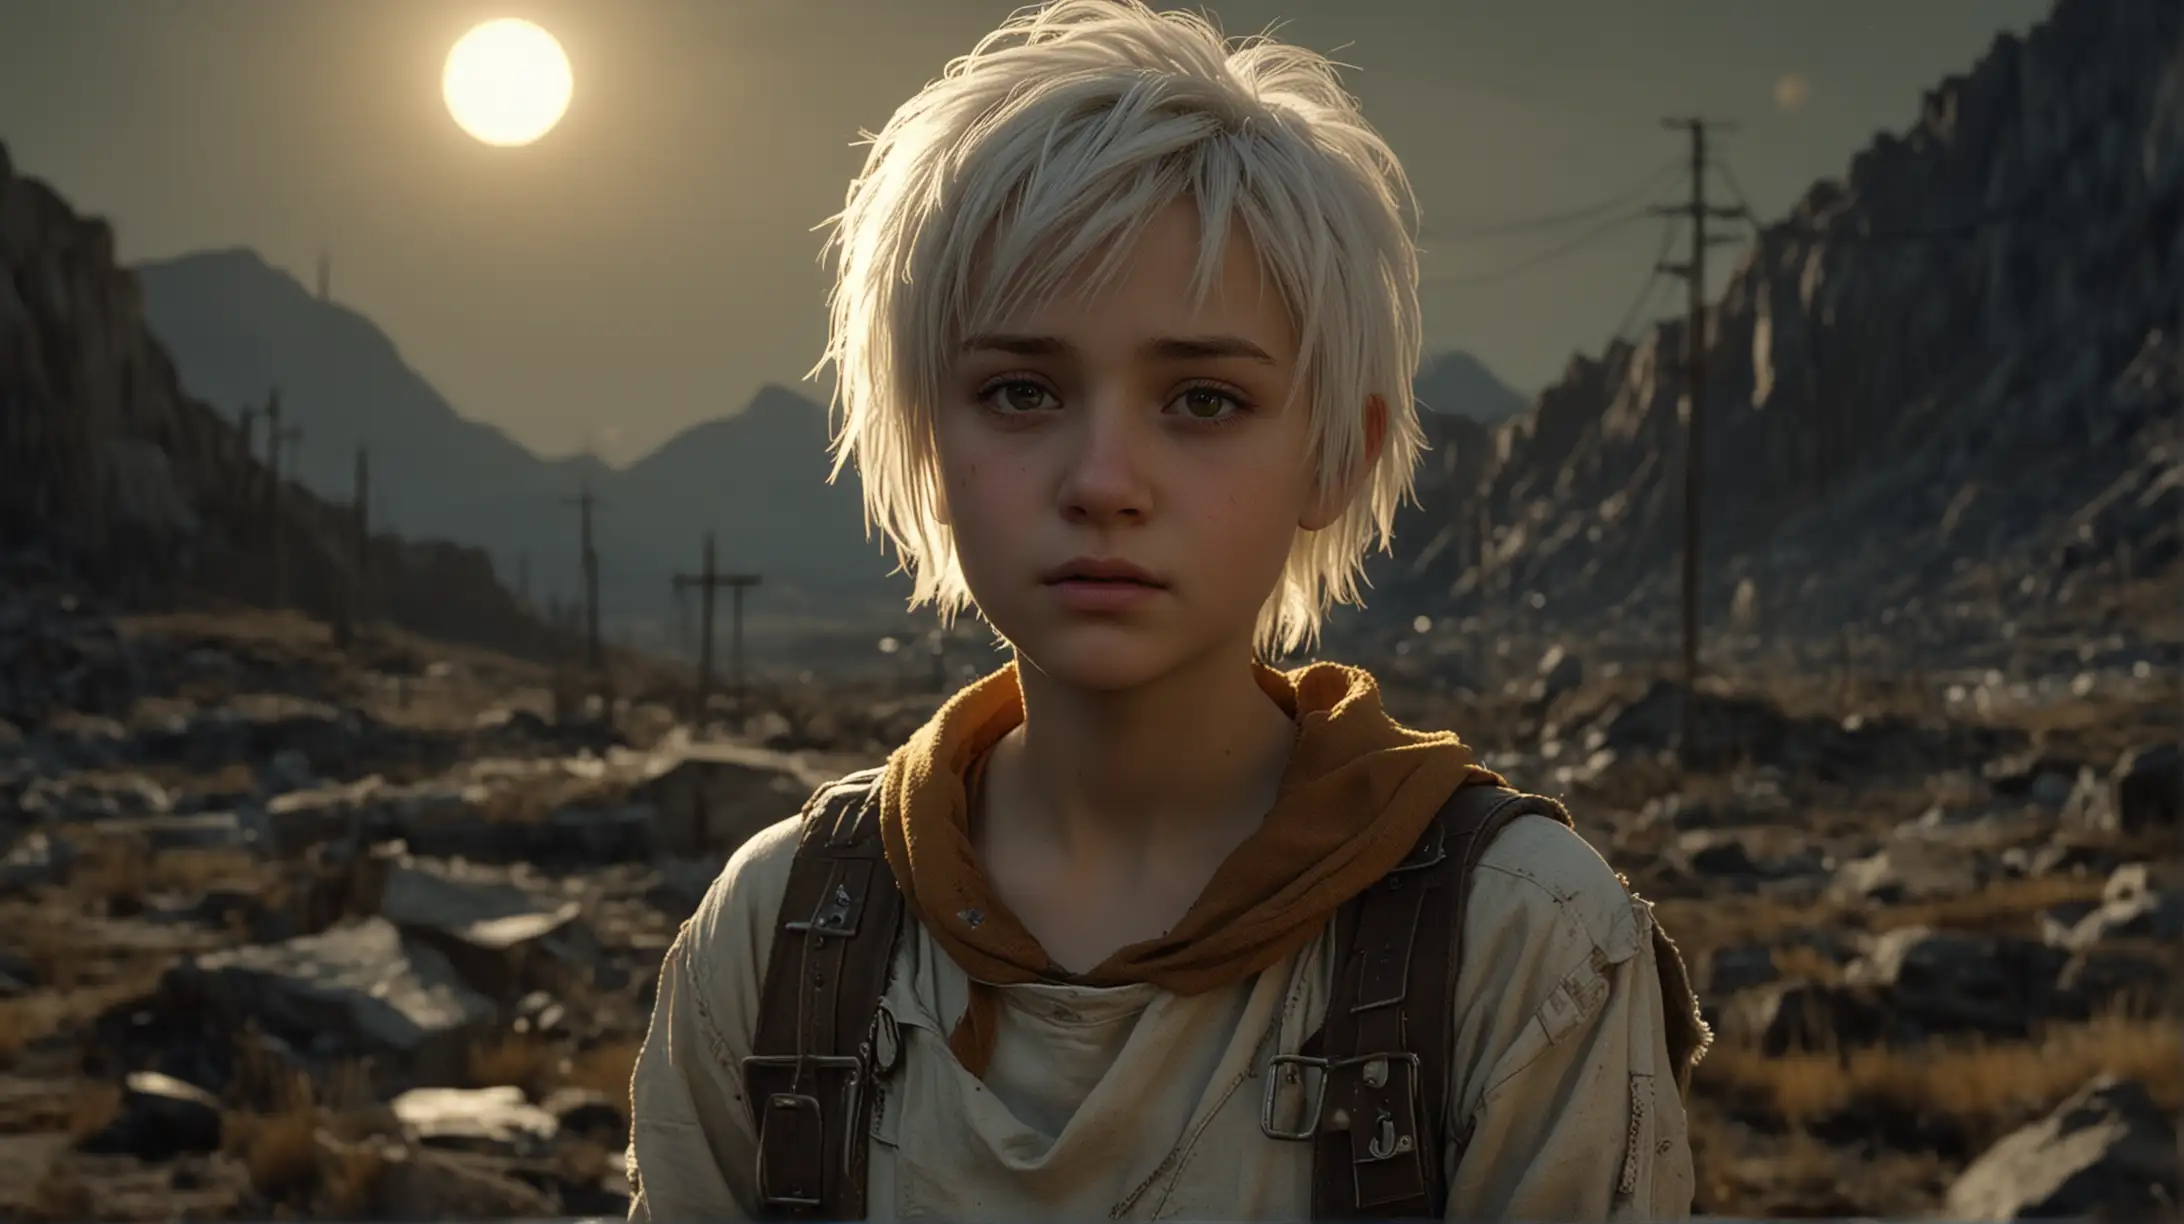 Wide shot 16 : 9 cinematic photorealistic.   Extremely beautiful small 11 year old, very girlish, wearing post apocalyptic raggedy clothes. She has a white pixie haircut, with a worried look on her face.there is a golden butterscotch glow shining from behind her.  Its a dark, mysterious 
 surrounding lit by a full moon and a scared landscape.